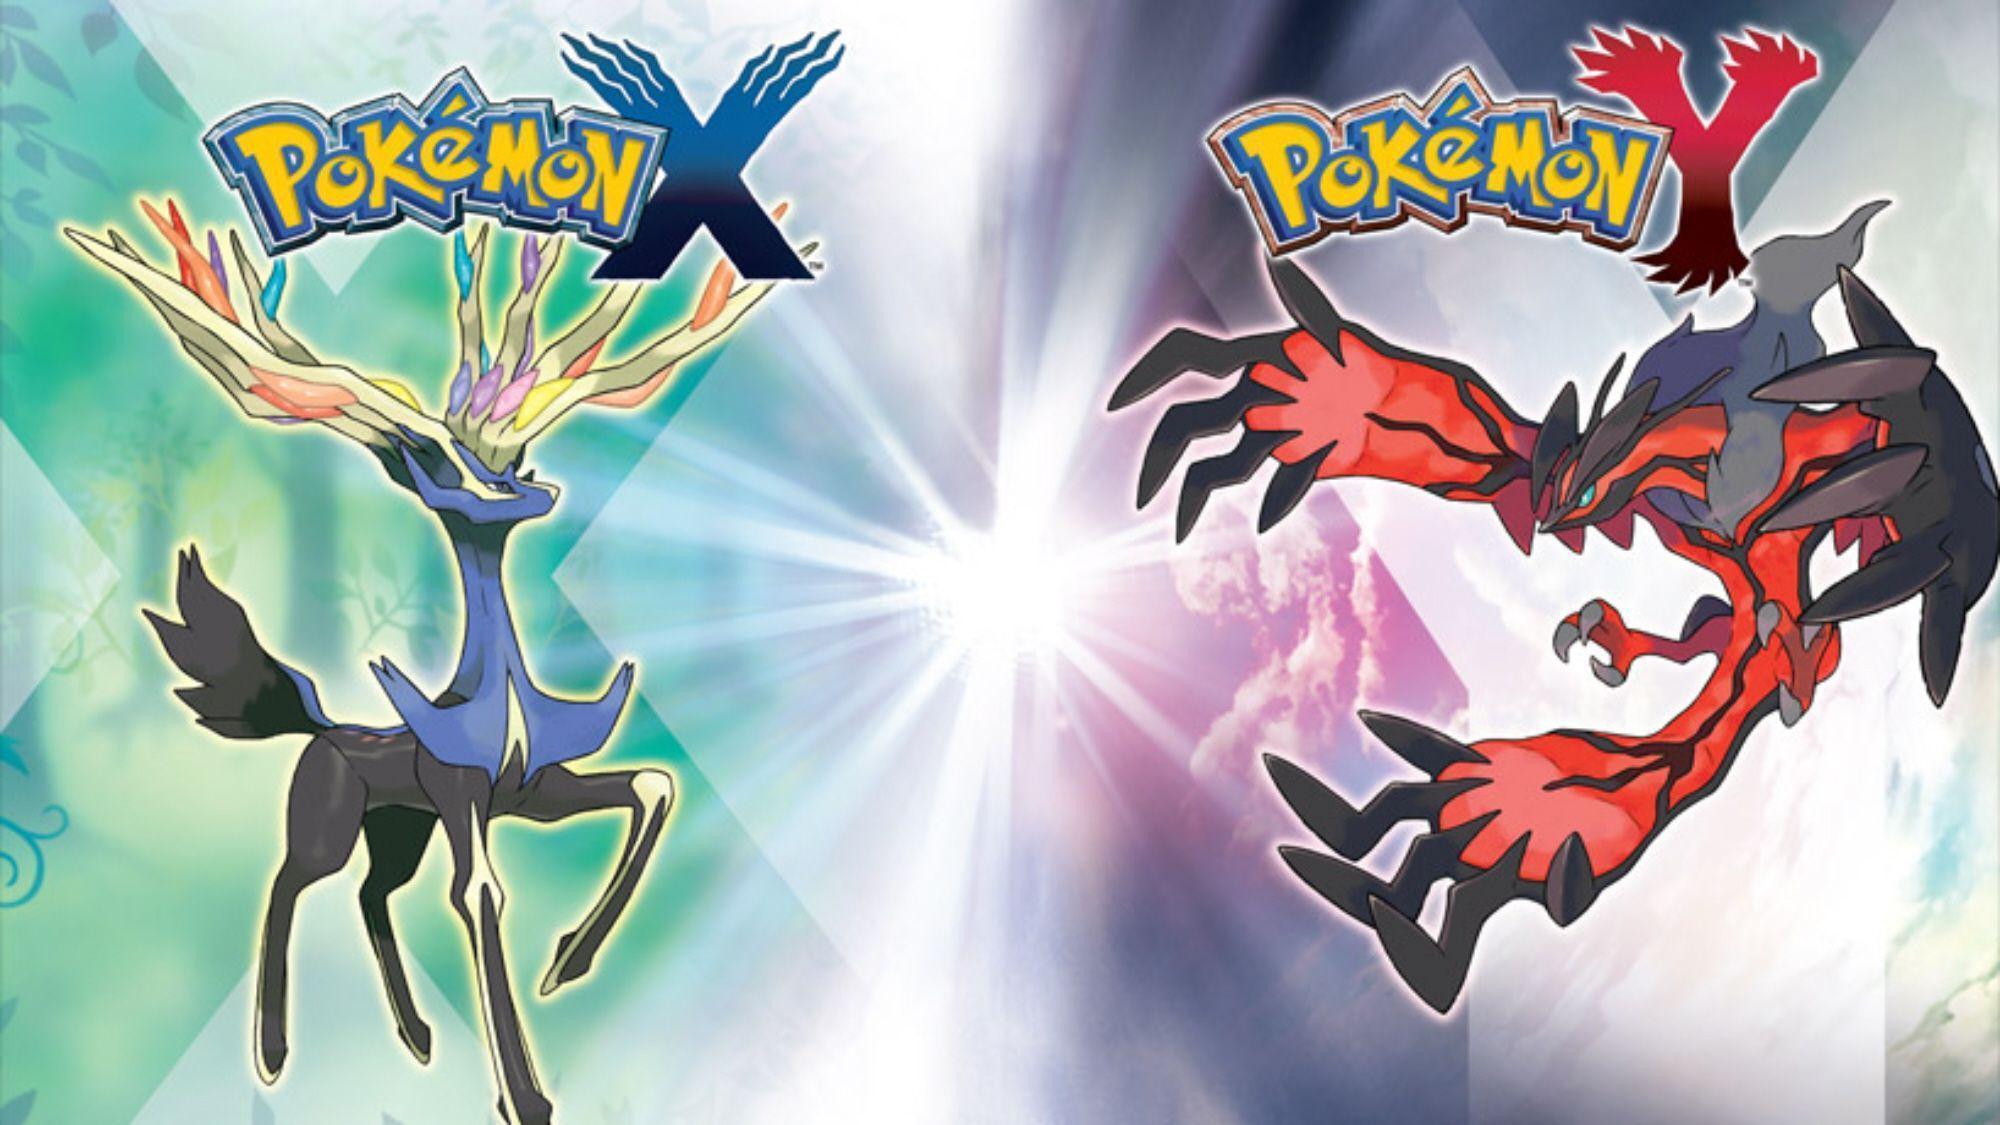 Cartoons Wallpaper: Pokemon X And Y Wallpaper High Quality